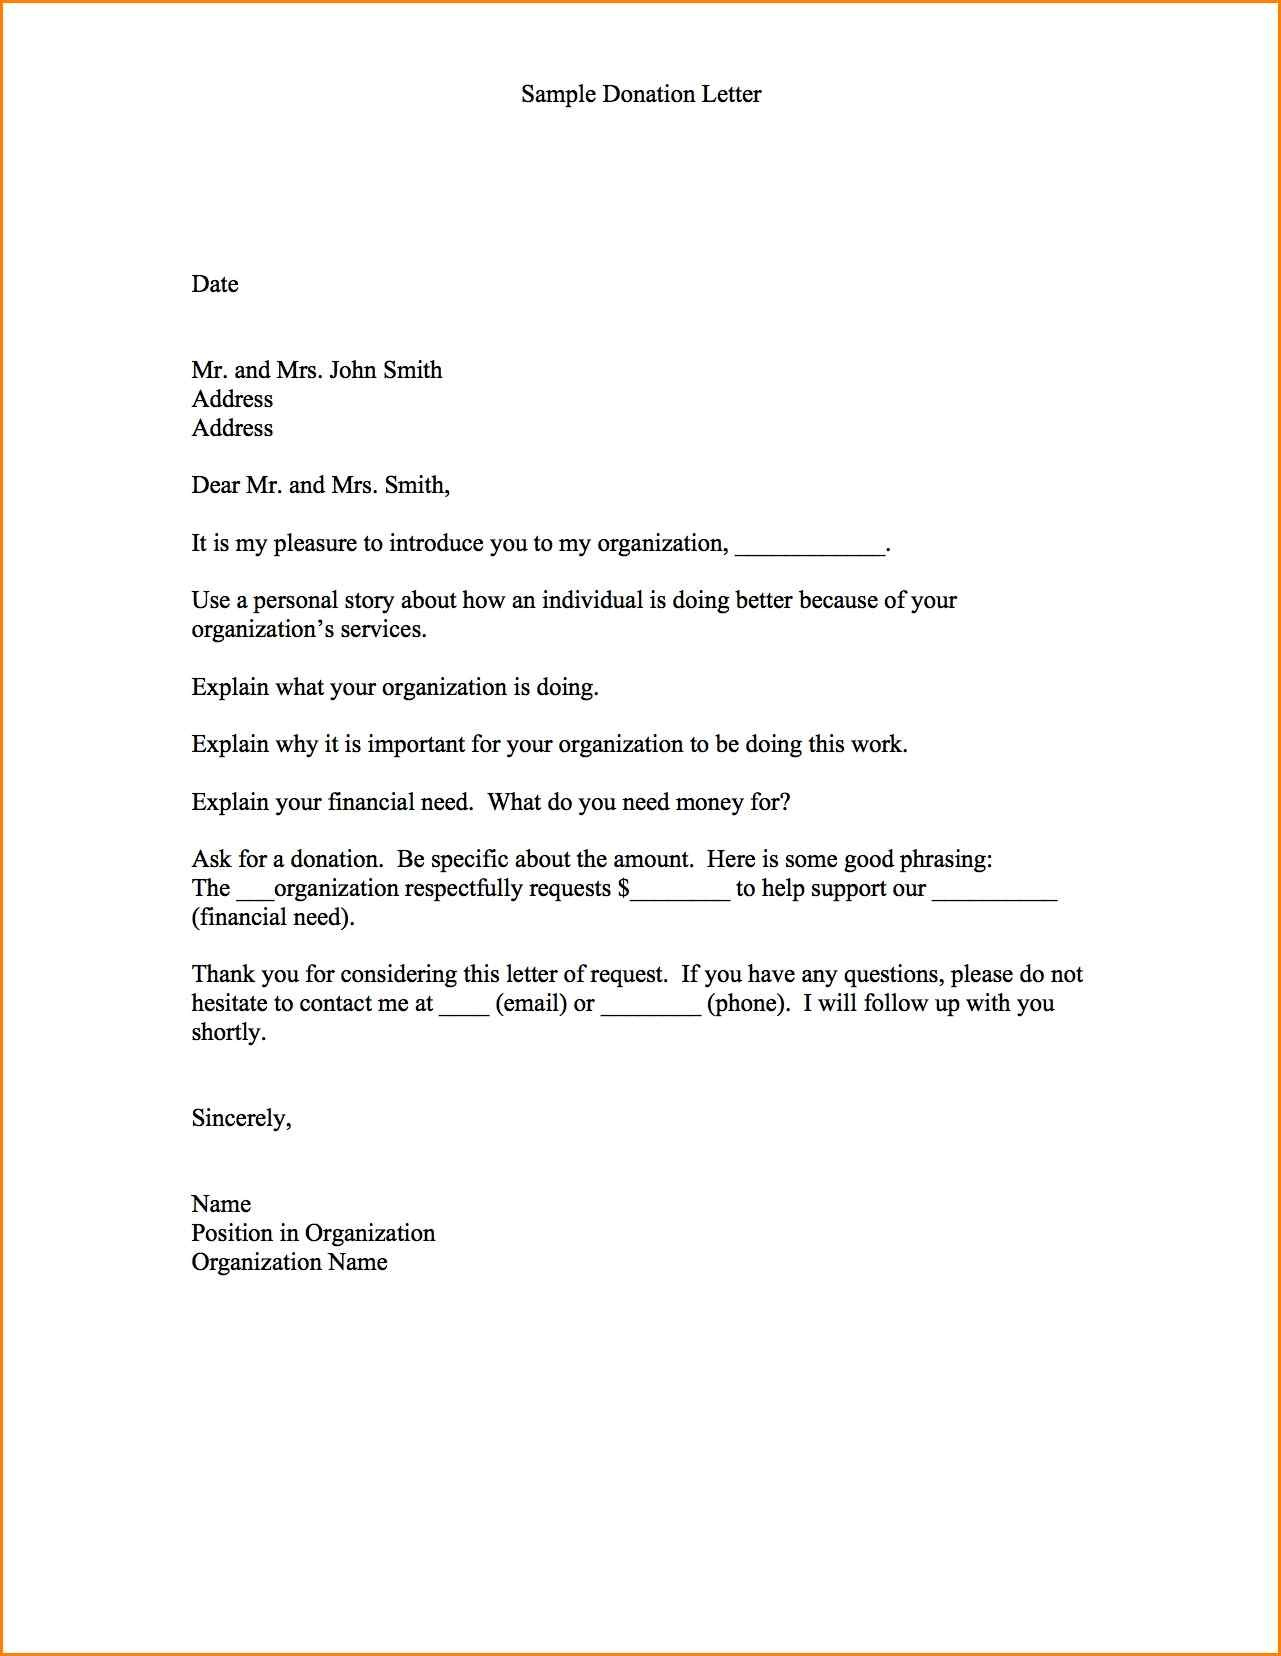 Donation Request Letter Template - Fundraising Appeal Letter format New 11 Sample Donation Request